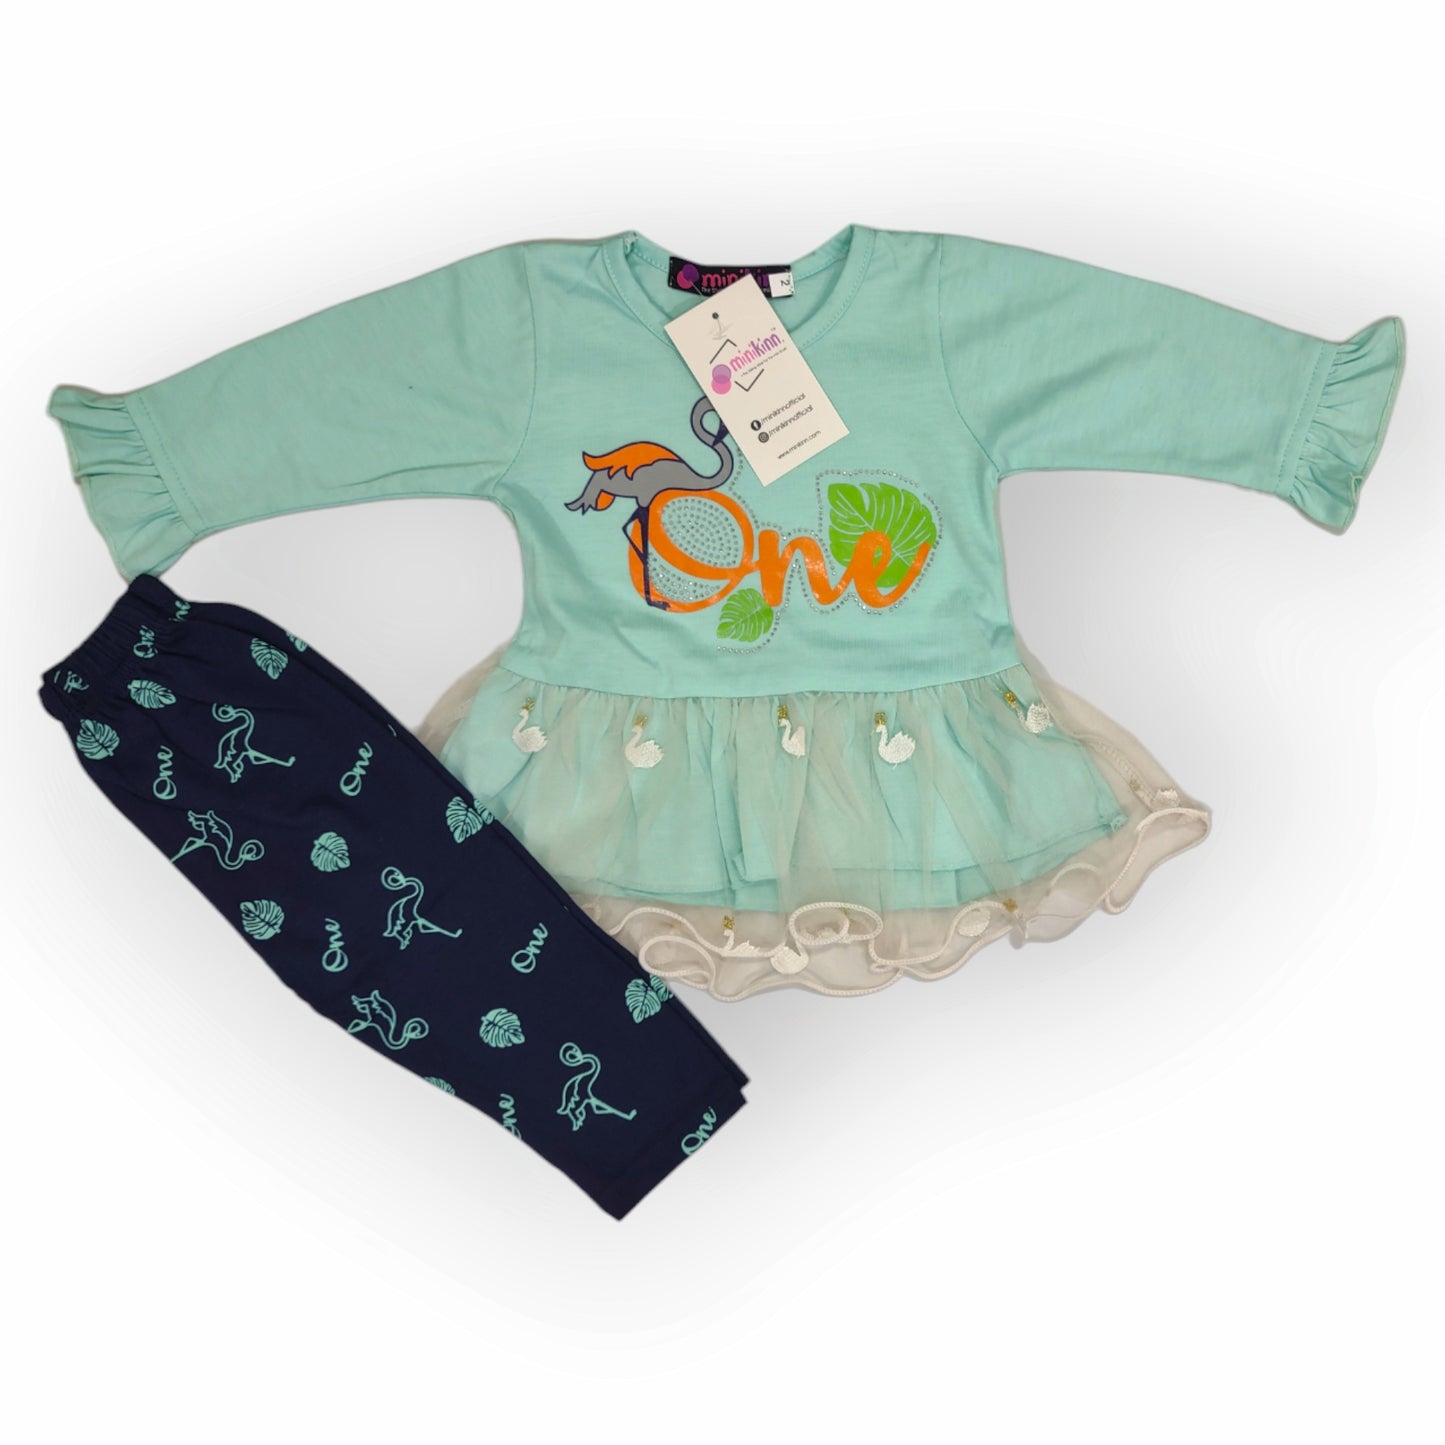 Girls Imported Net / Fine Jersey Frock with Trousers - 2 Piece Set (Gfl-V5.1-2014)